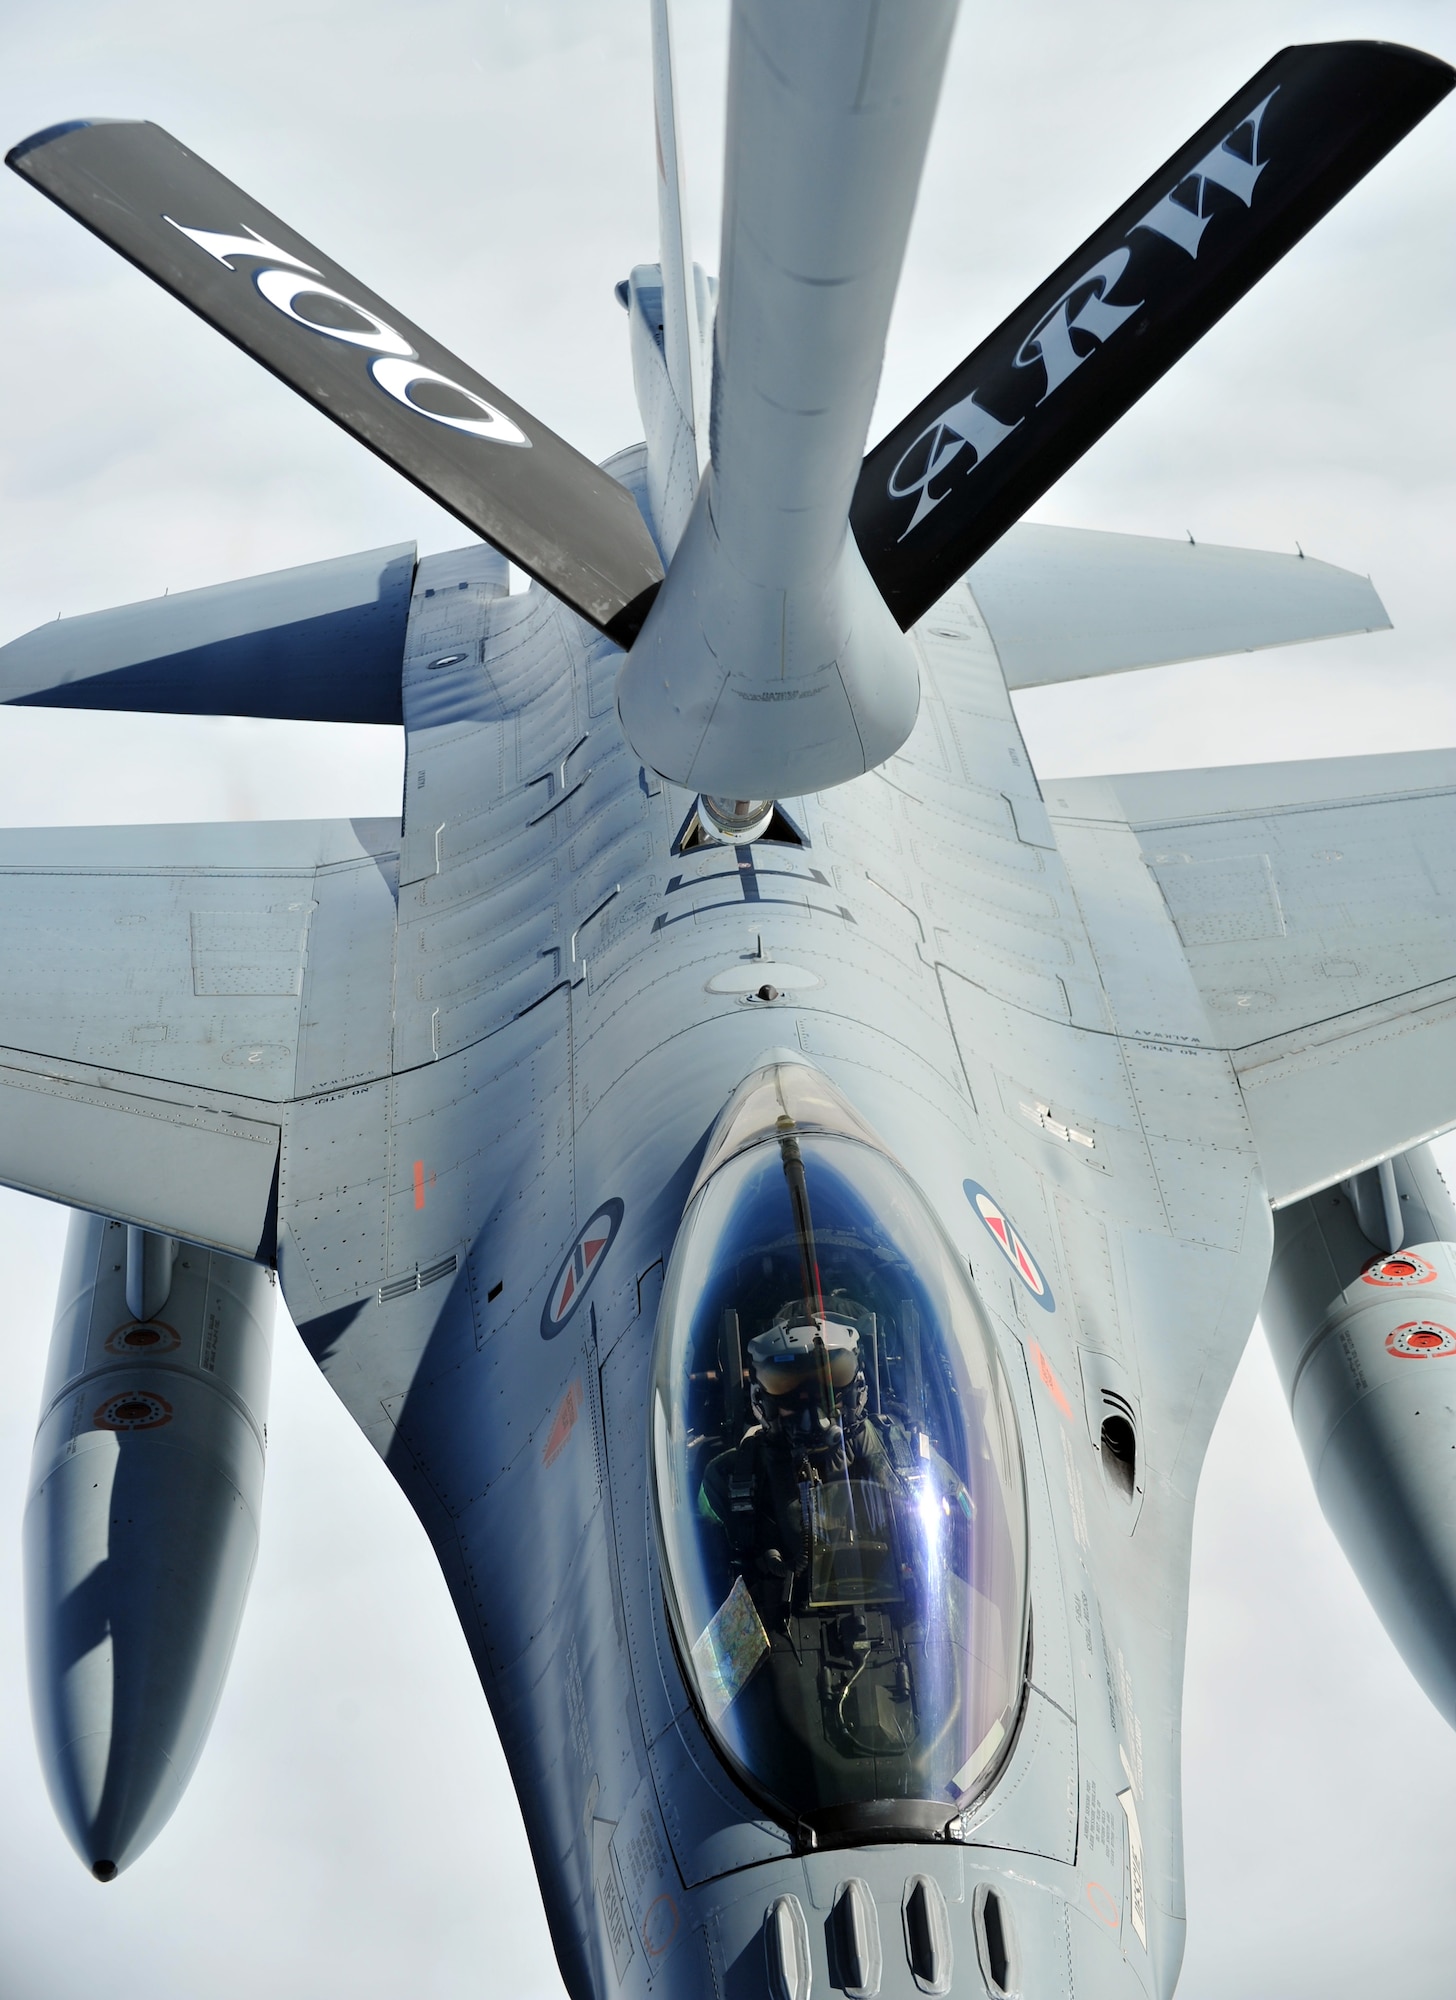 A Royal Norwegian Air Force F-16 Fighting Falcon prepares for a refuel from a KC-135 Stratotanker assigned to Royal Air Force Station Mildenhall, England, during a training sortie Sept. 5, 2014, over Norway. The KC-135 was part of a four-ship which enables tankers to provide concentrated aerial refueling support for large forces during major operations. (U.S. Air Force photo/Senior Airman Christine Griffiths)